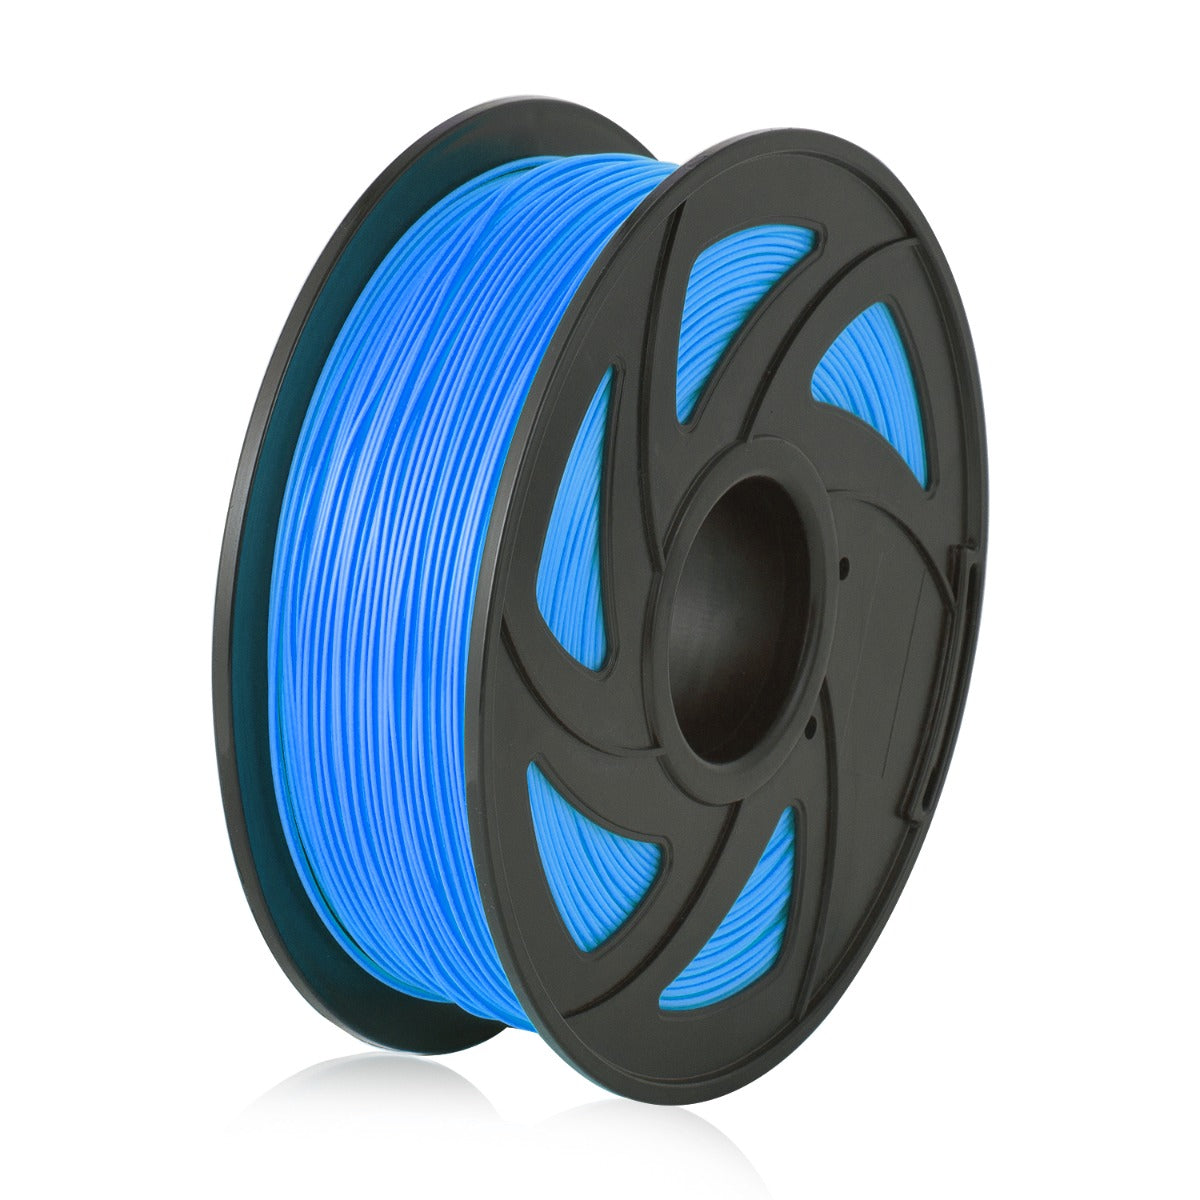 IMPERIAL BRAND PLA+ FLUORESCENT BLUE 3D Printer Filament 1.75mm 1KG Spool Filament for 3D Printing, Dimensional Accuracy +/- 0.02